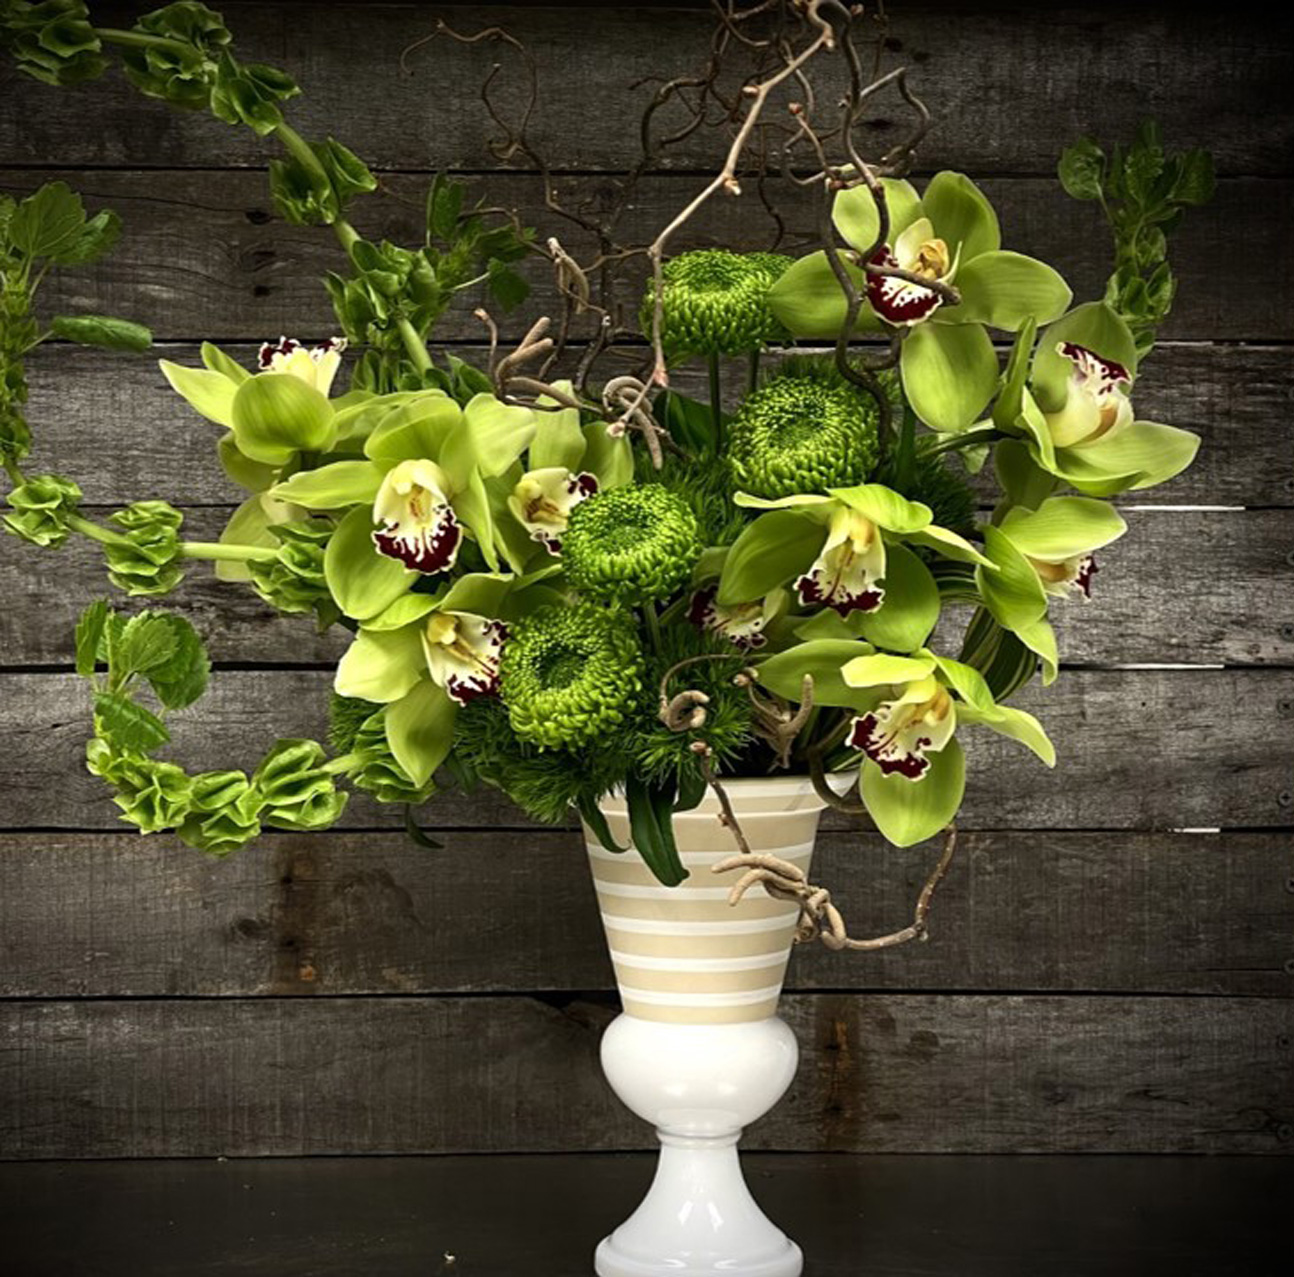 Ami Wilber Floral Design workshop, green orchid dianthus bells of Ireland and mums